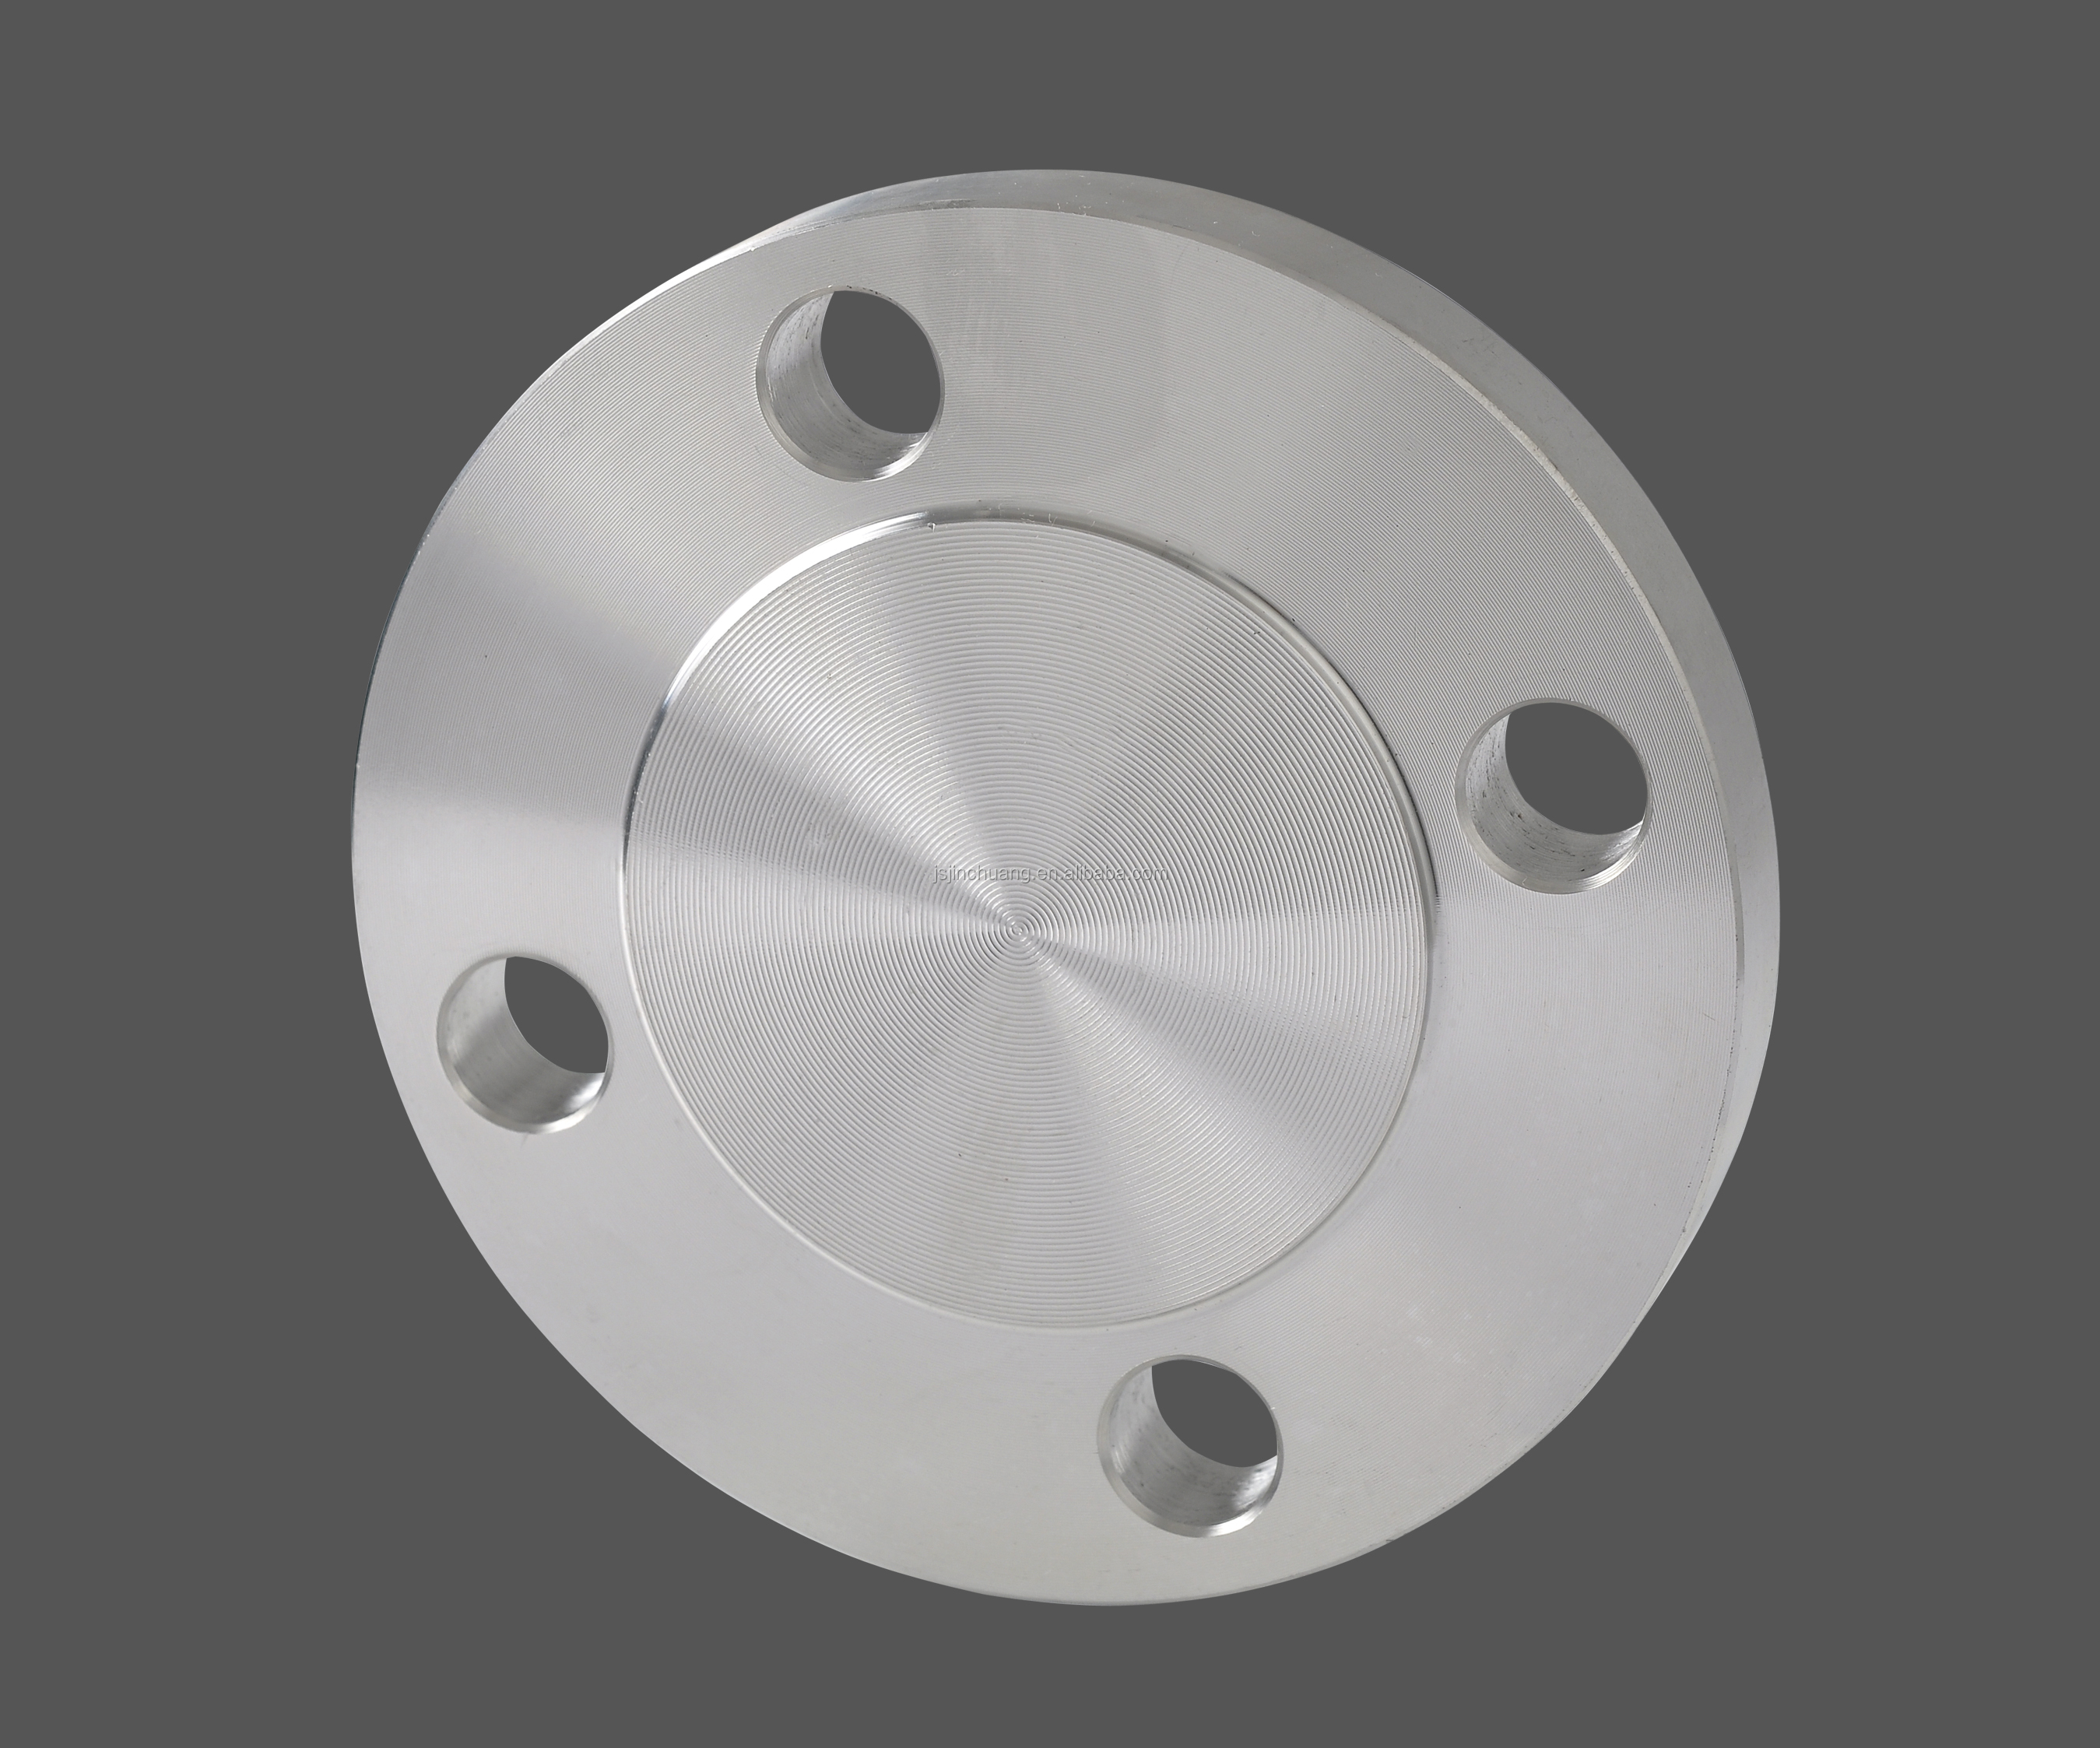 Factory stainless steel blind flange asni b16.5 price